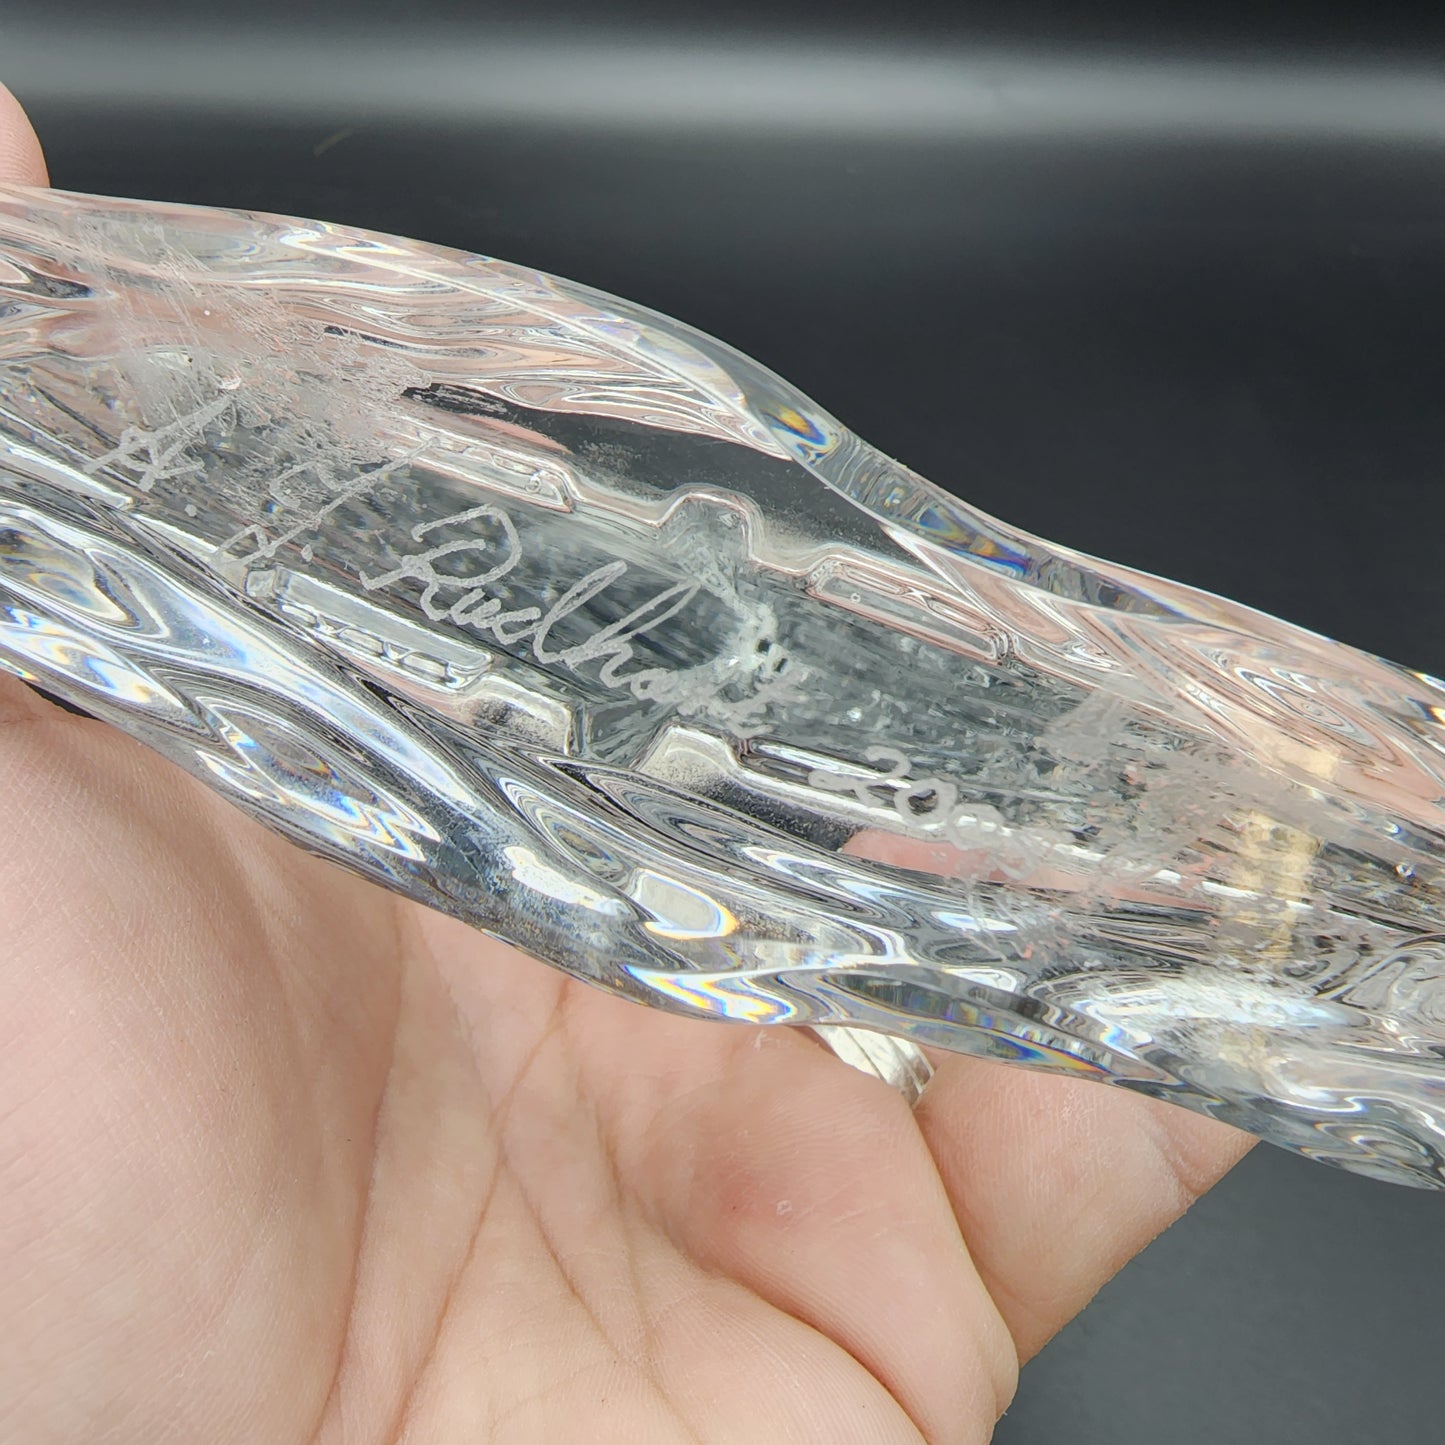 Signed 2005 Waterford Crystal Sailboat